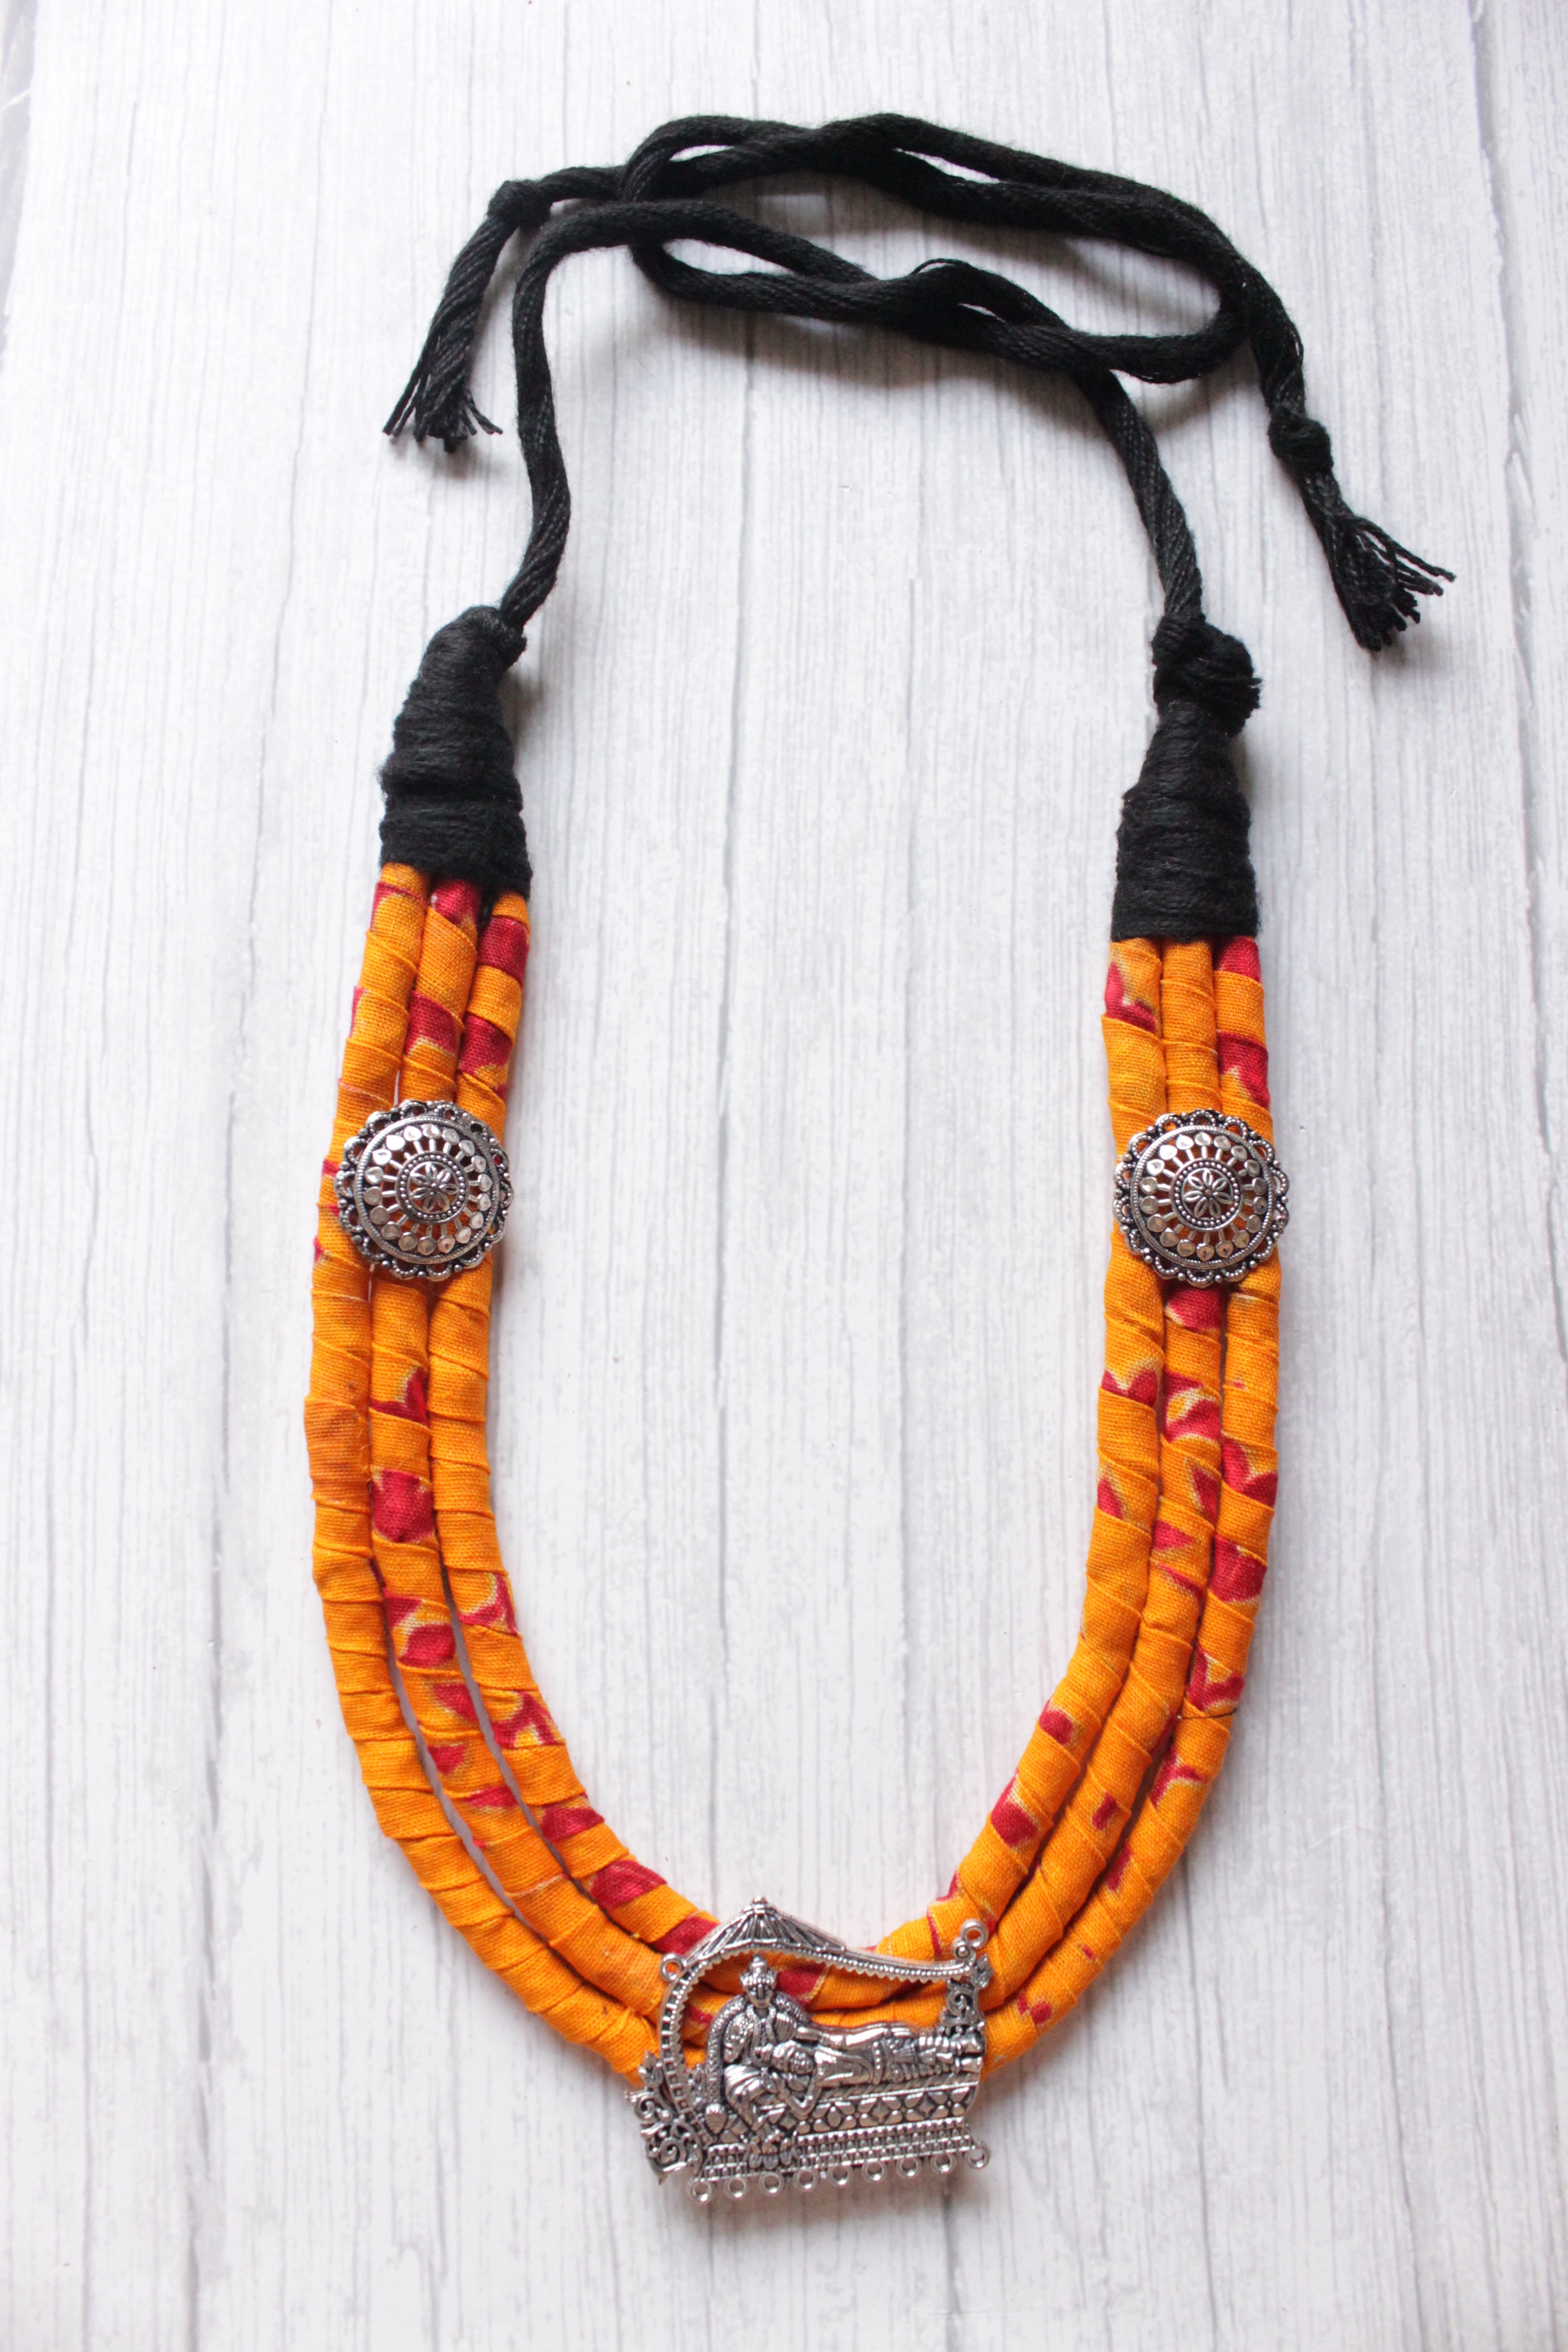 Handmade Fabric 3 Layer Necklace with Krishna in a Palki Pendant